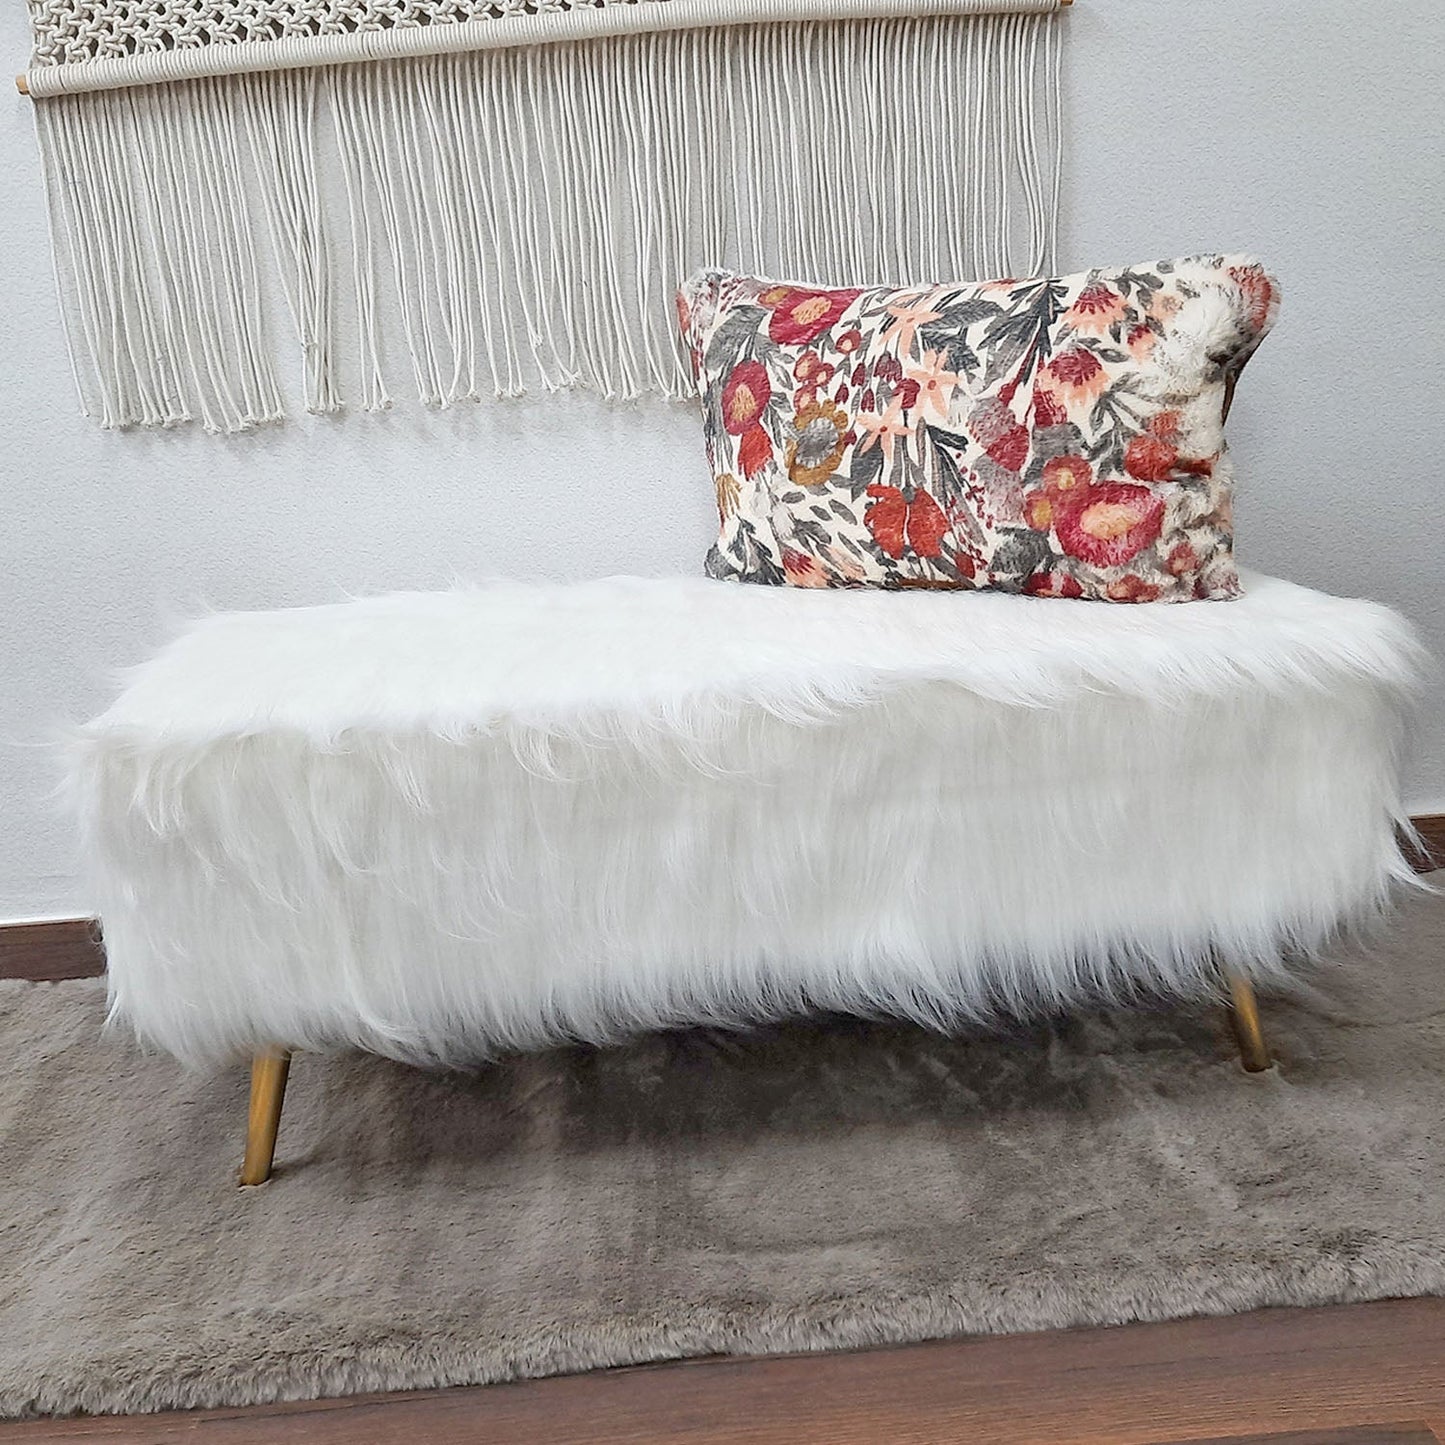 Noviato Collection – White Premium Long Faux Fur Bench Gold Metal Legs Modern On-Trend Style Multi-Functional Ottoman Bench Seat, 90 cm length | from Avioni